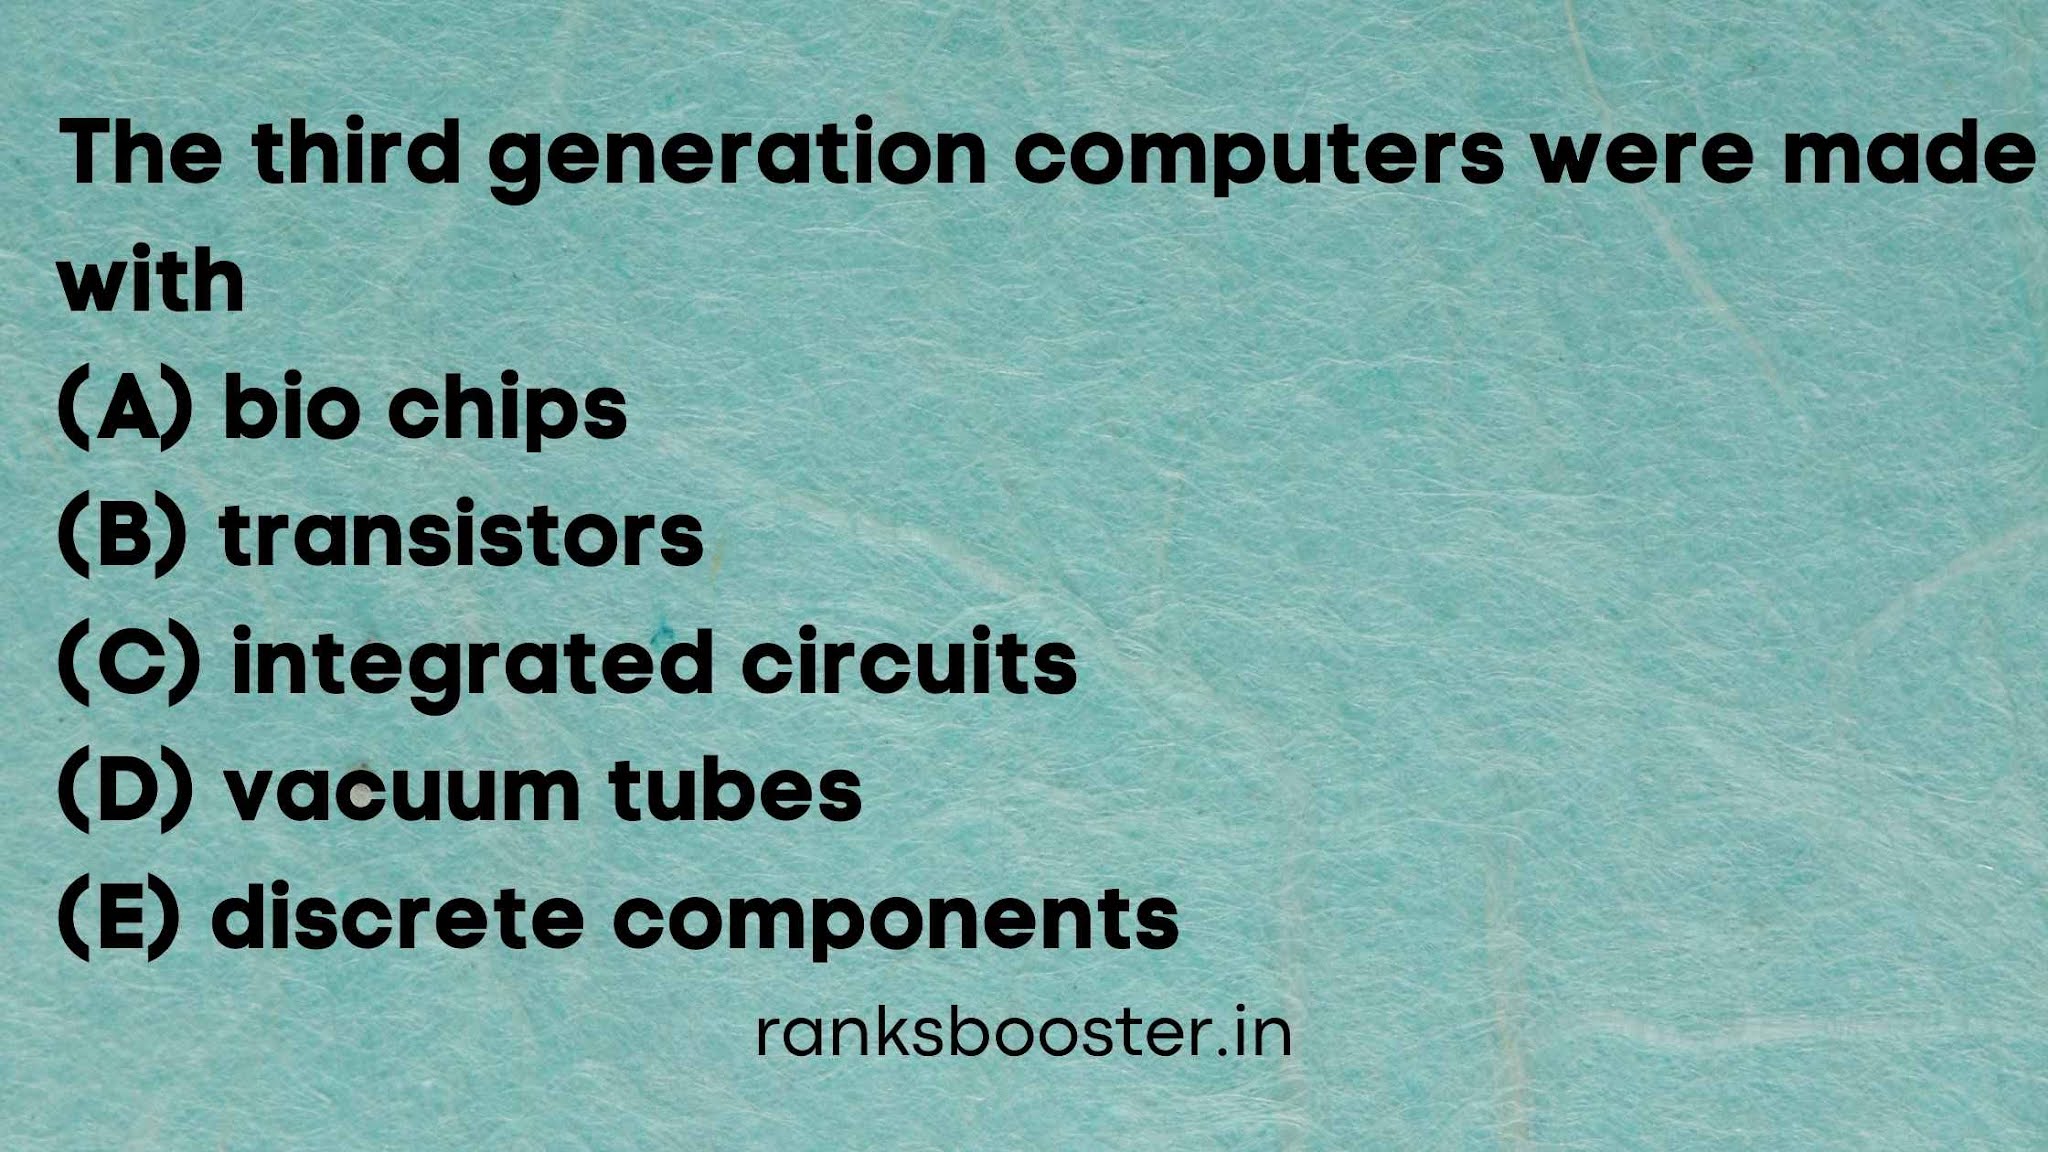 The third generation computers were made with (A) bio chips (B) transistors (C) integrated circuits (D) vacuum tubes (E) discrete components